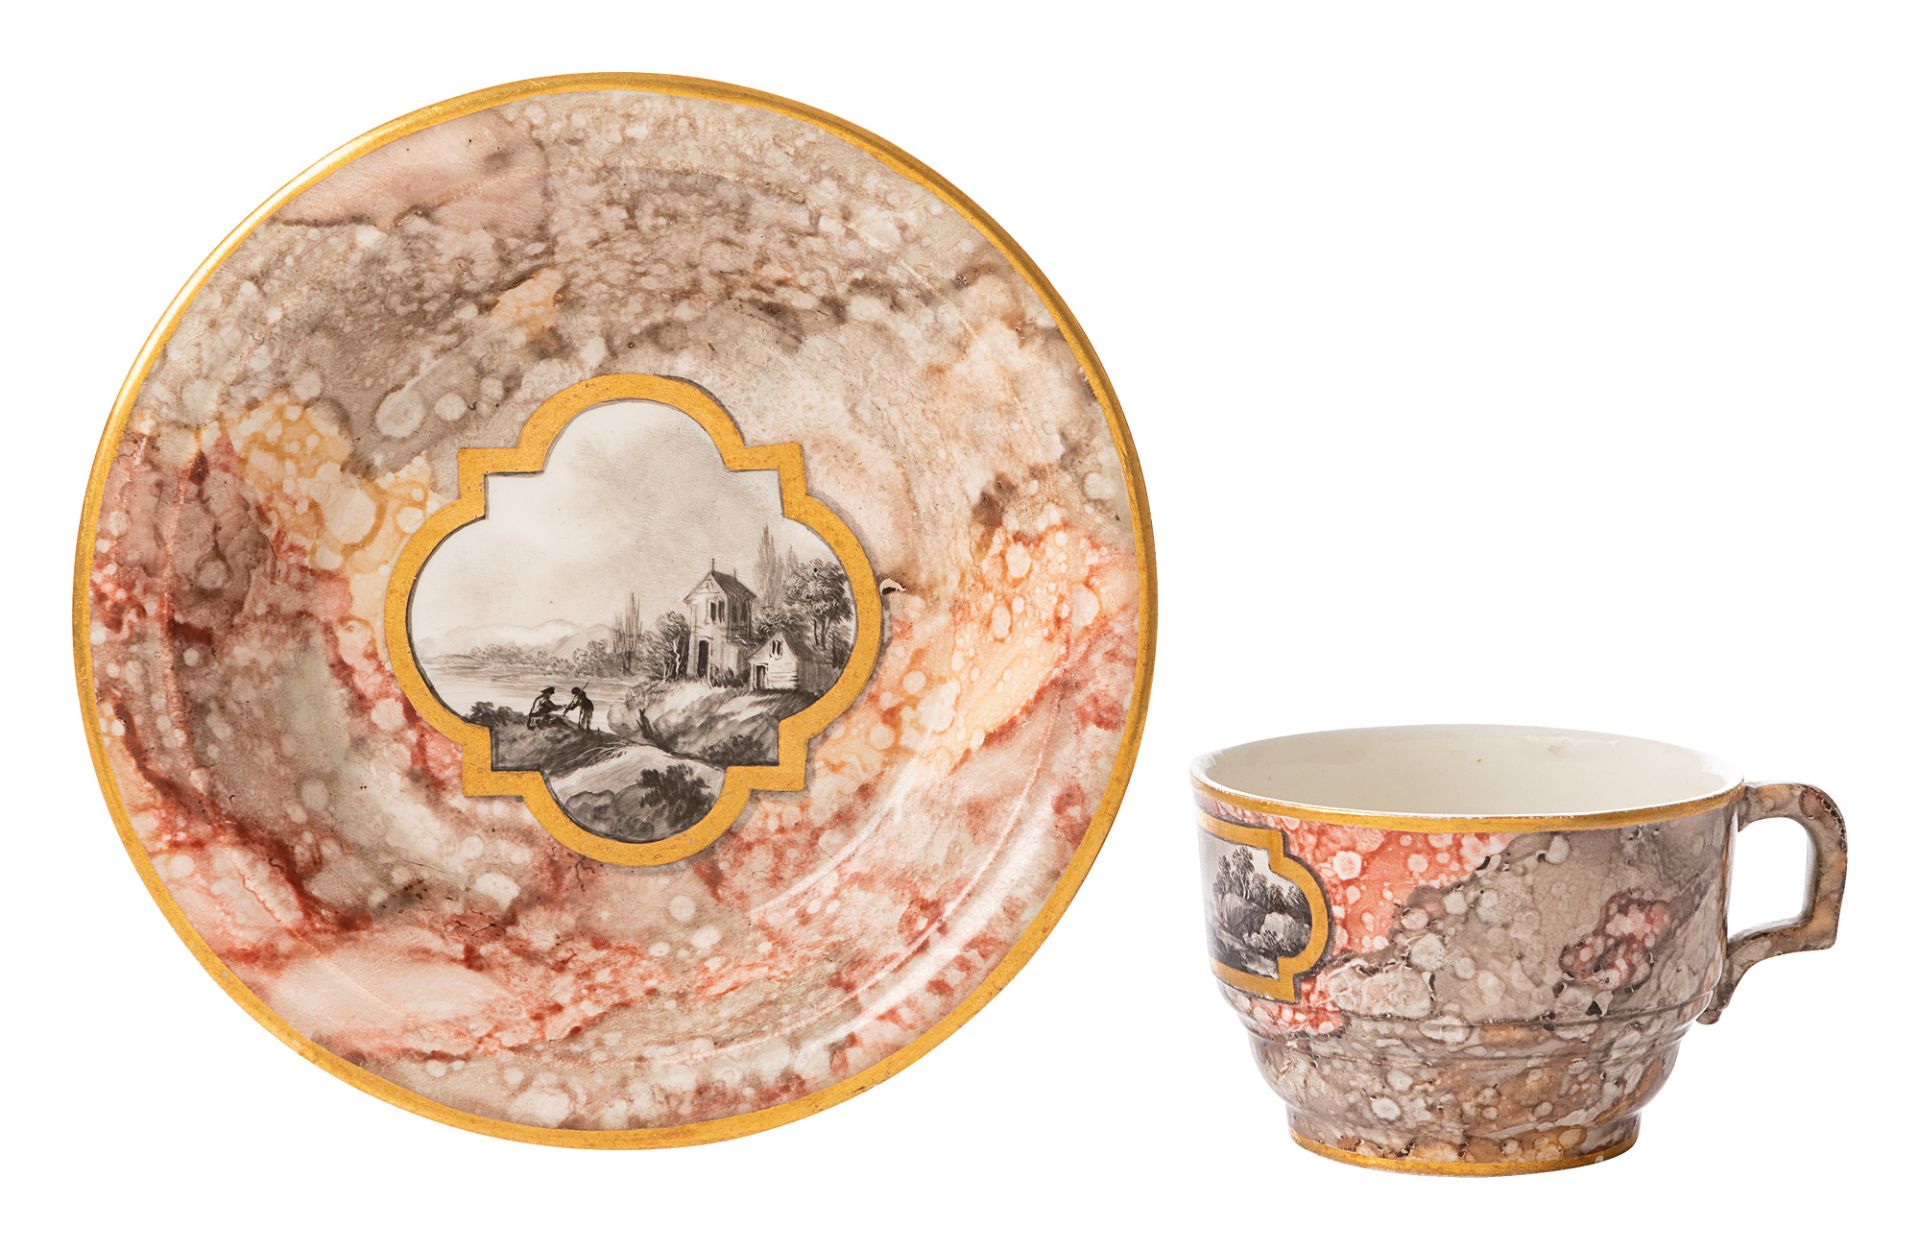 Cup and saucer with trompe-l'œil marble and landscape scenes - Image 2 of 4